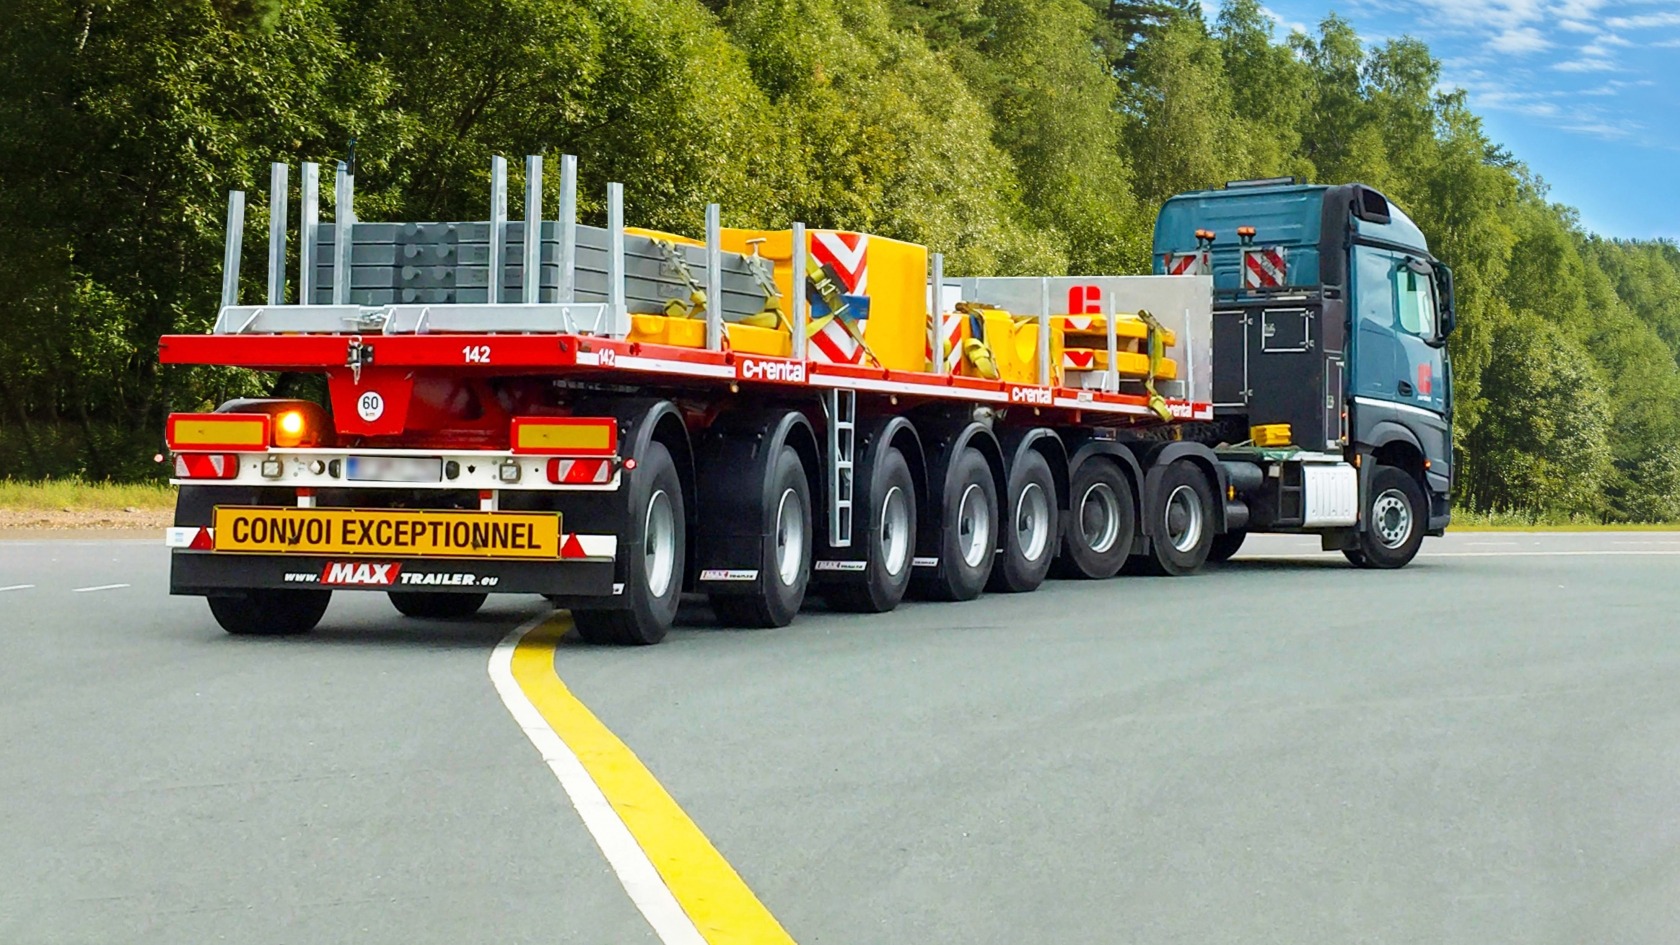 MAX 410 ballast trailer for the transport of crane weights